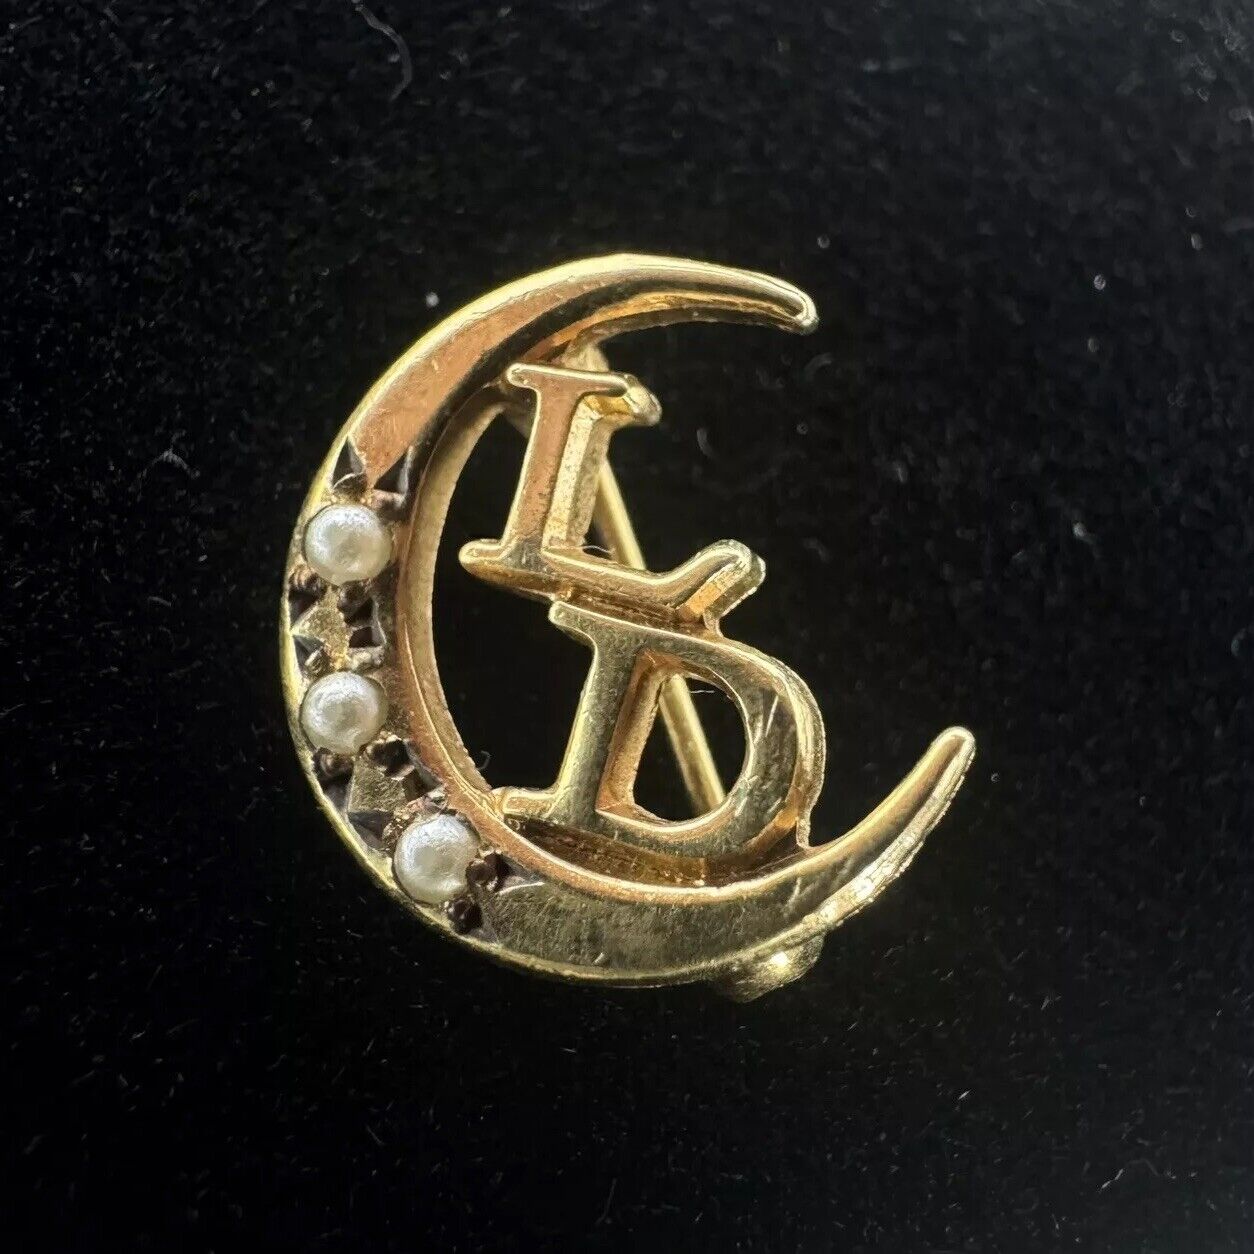 RARE VINTAGE LD L D INITIAL GOLD MOON PIN WITH SEED PEARLS